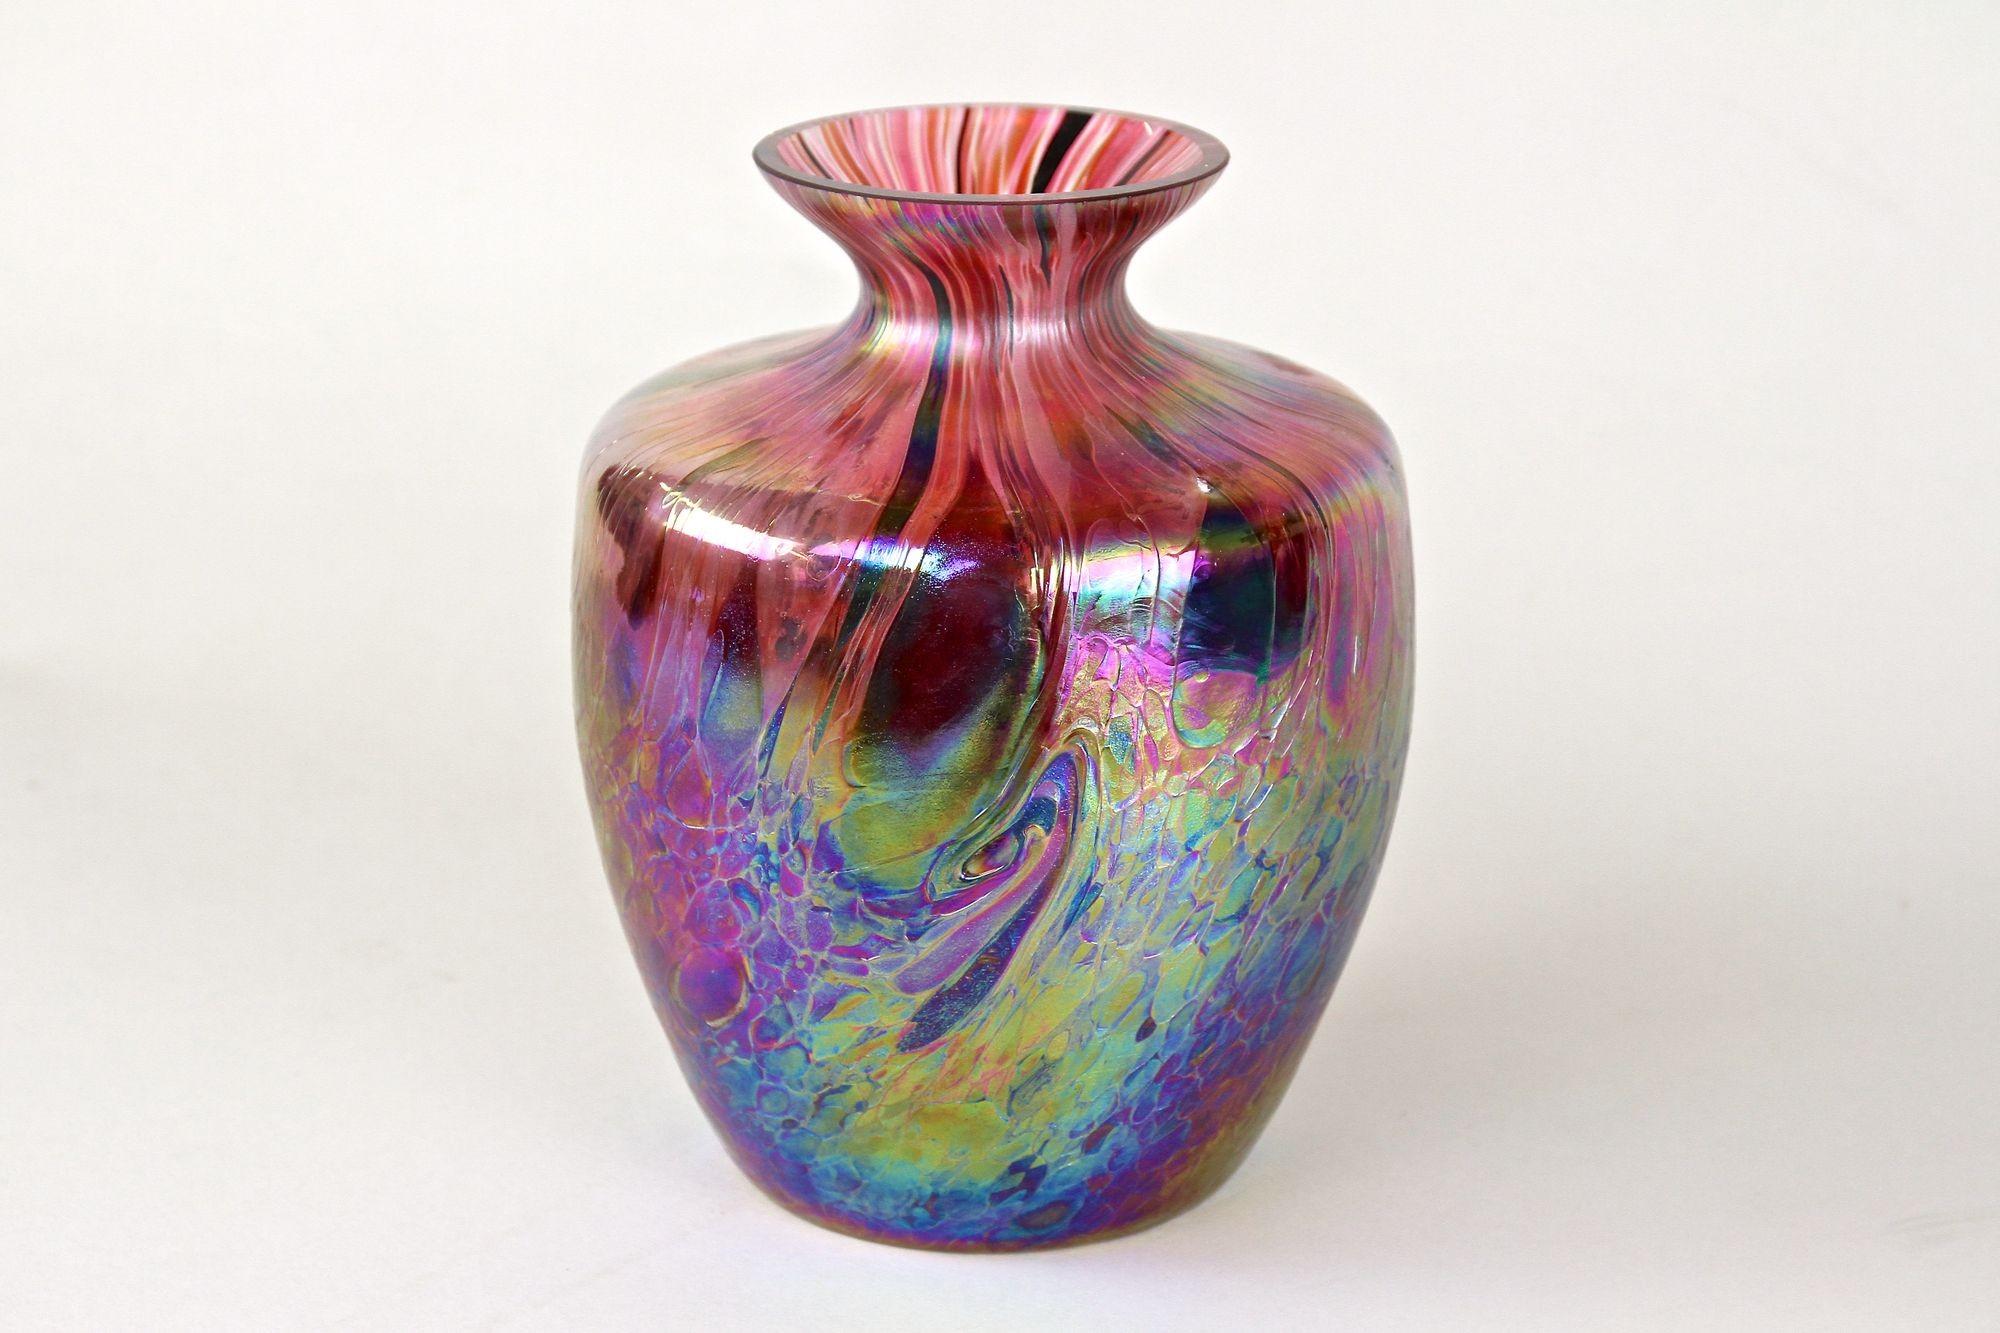 Breathtaking, large iridescent Bohemian glass vase from the Art Nouveau period around 1905. The absolute extraordinary, bulby shaped glass vase, attributed to Fritz Heckert, impresses with its one of a kind shimmering multi-colored surface.